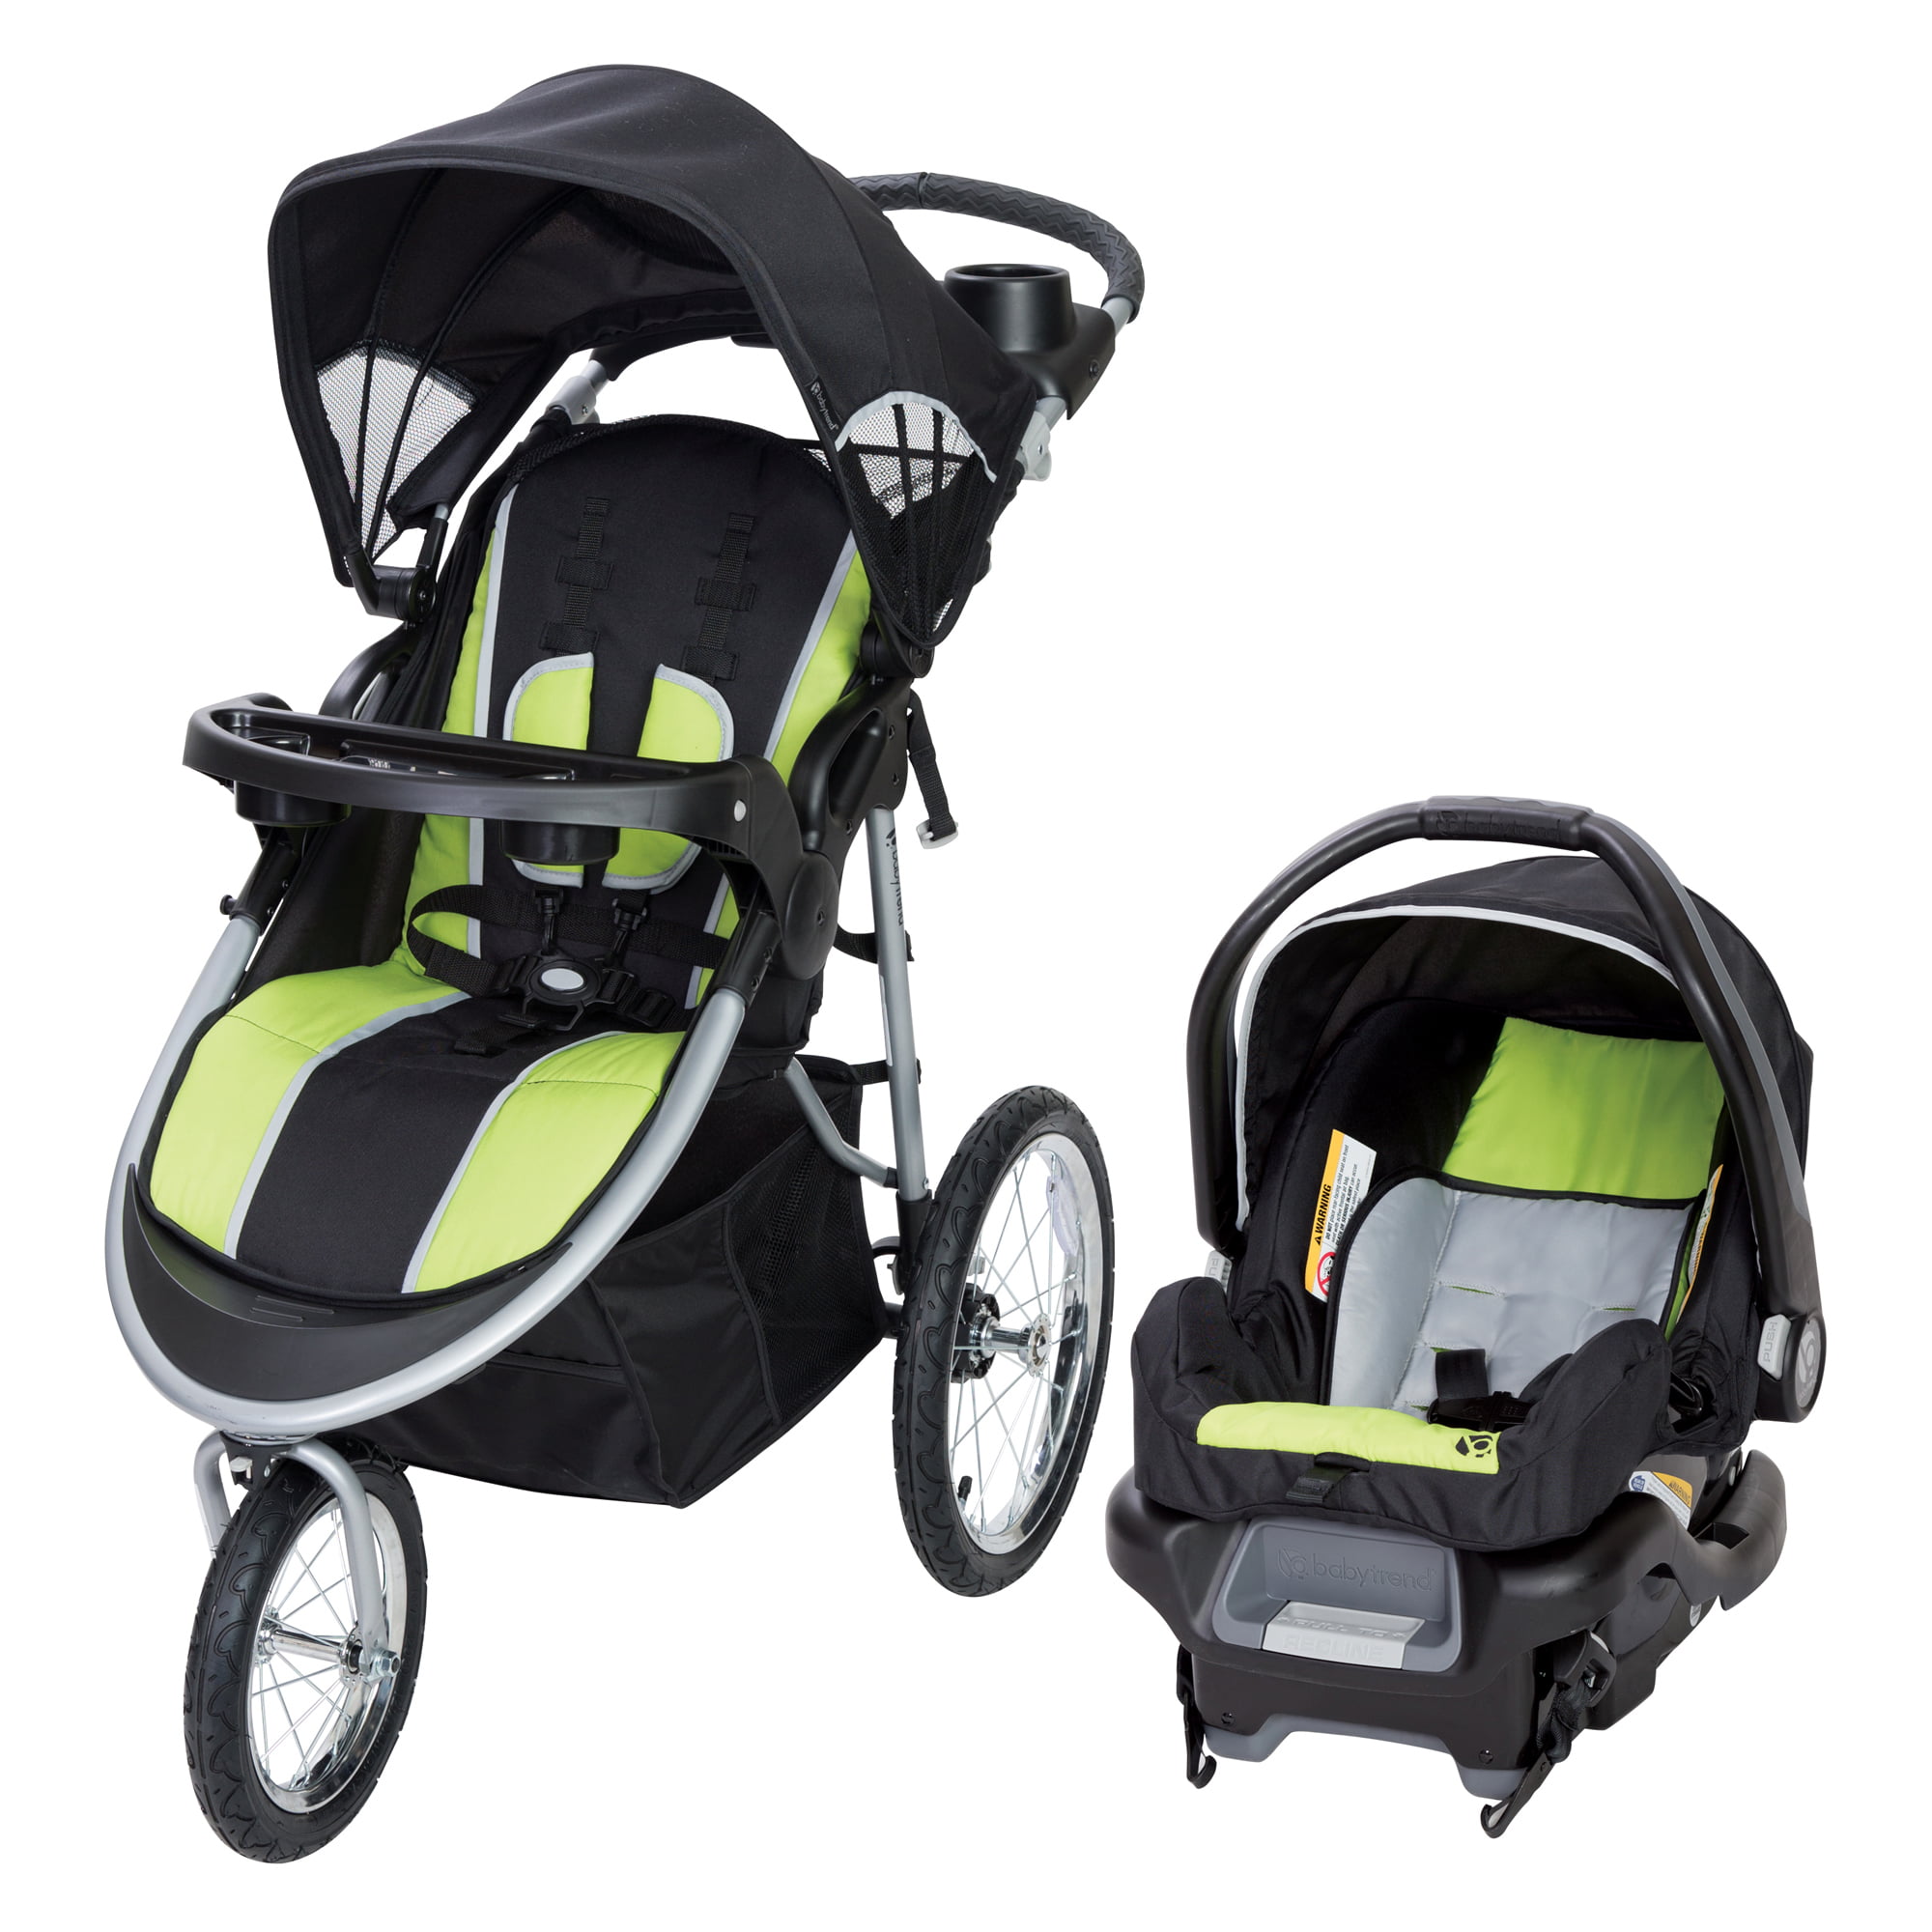 Baby Trend Pathway 35 Jogger Travel System Optic Teal 